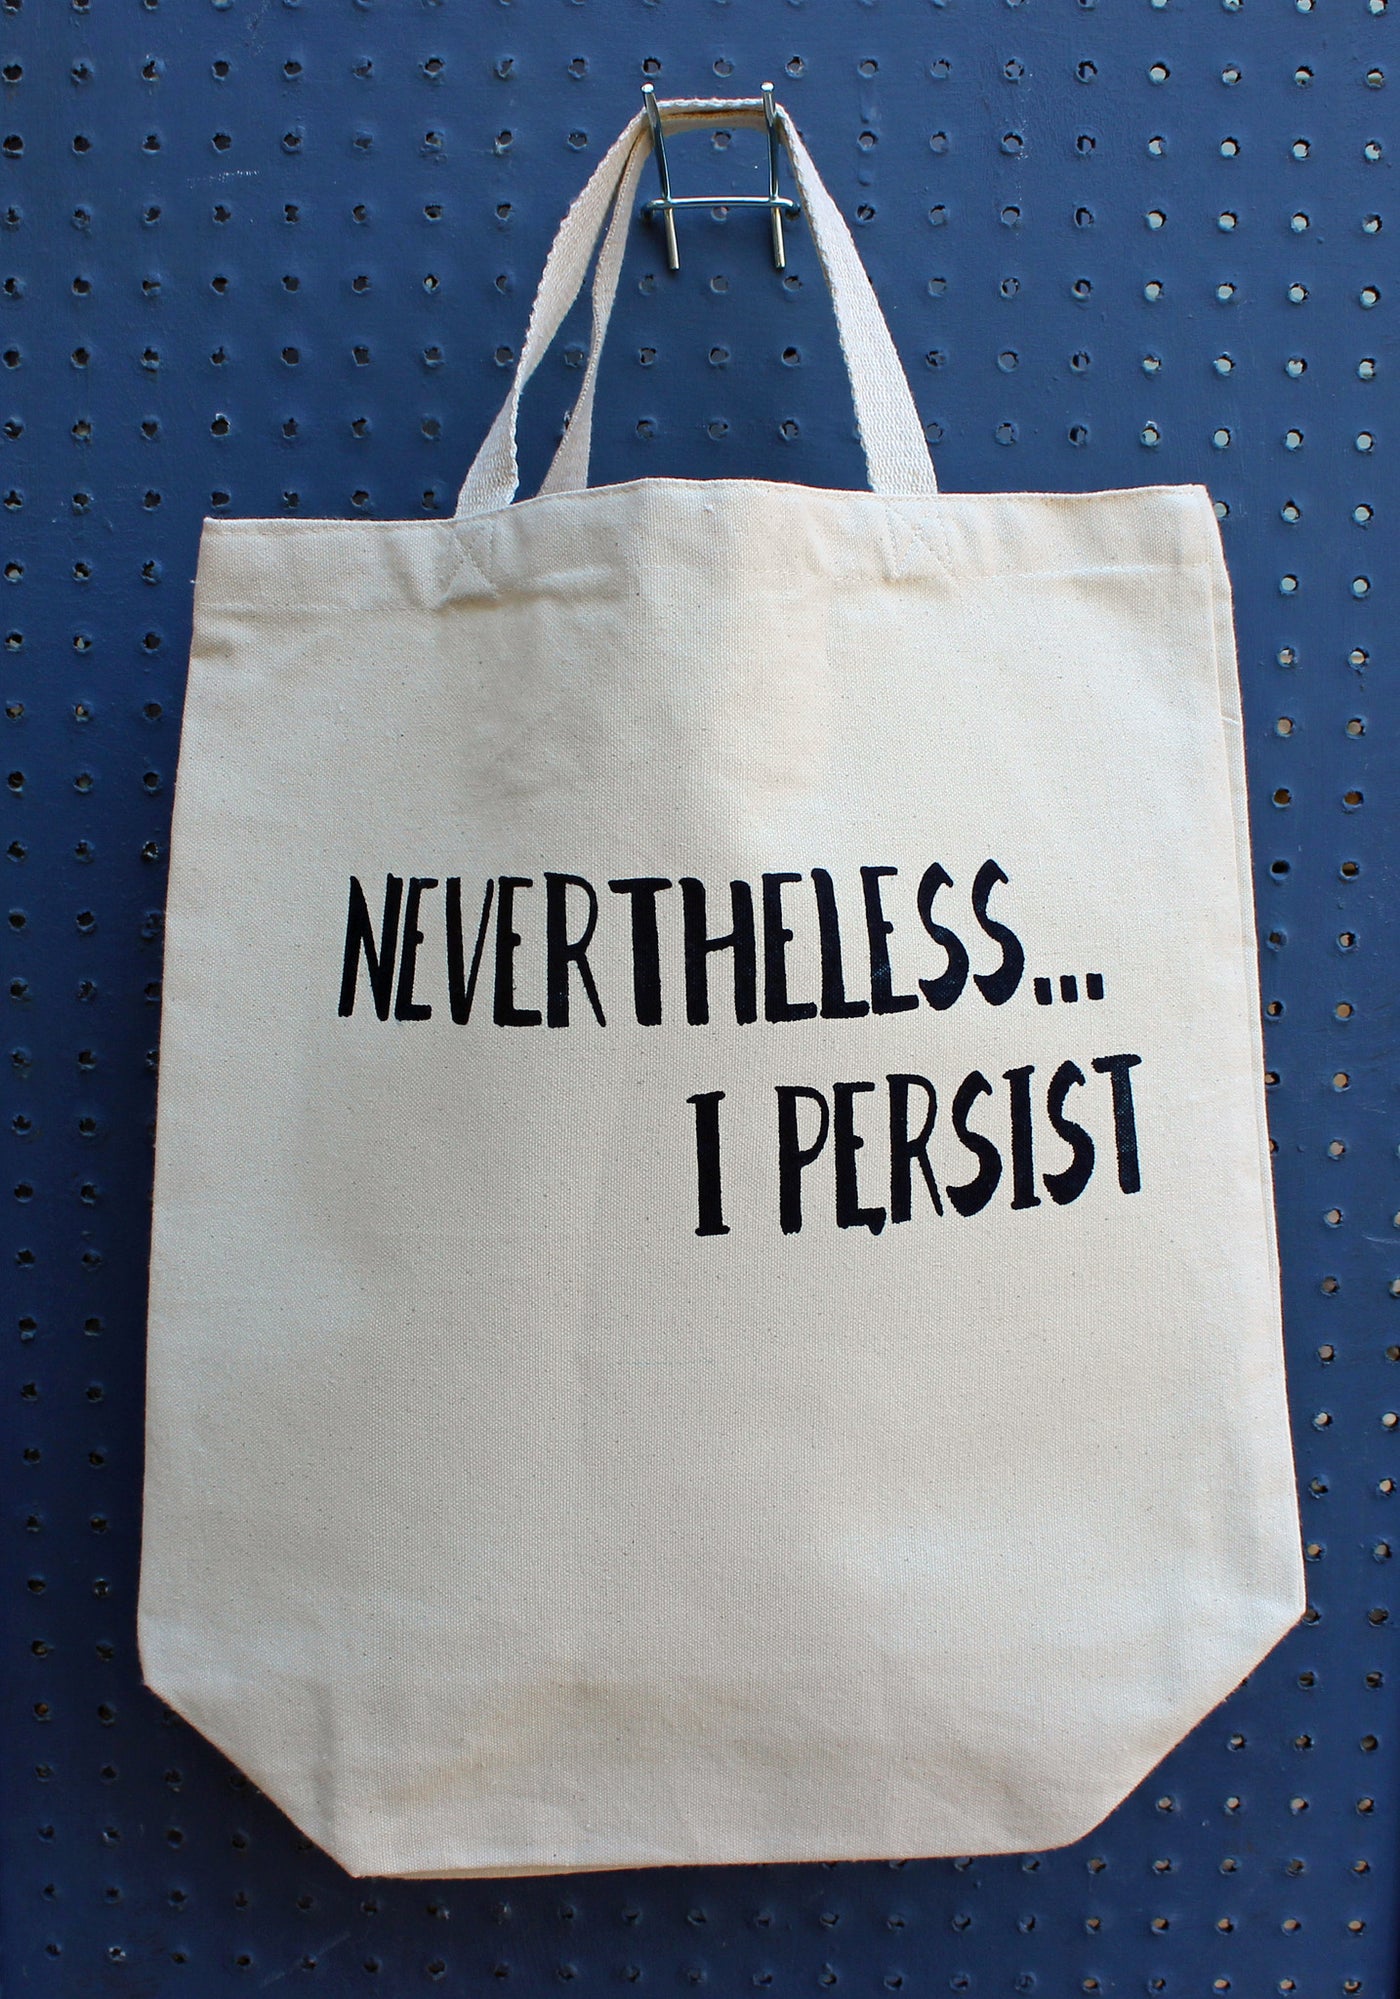 nevertheless...i persist - tote bag - Pretty Clever Words